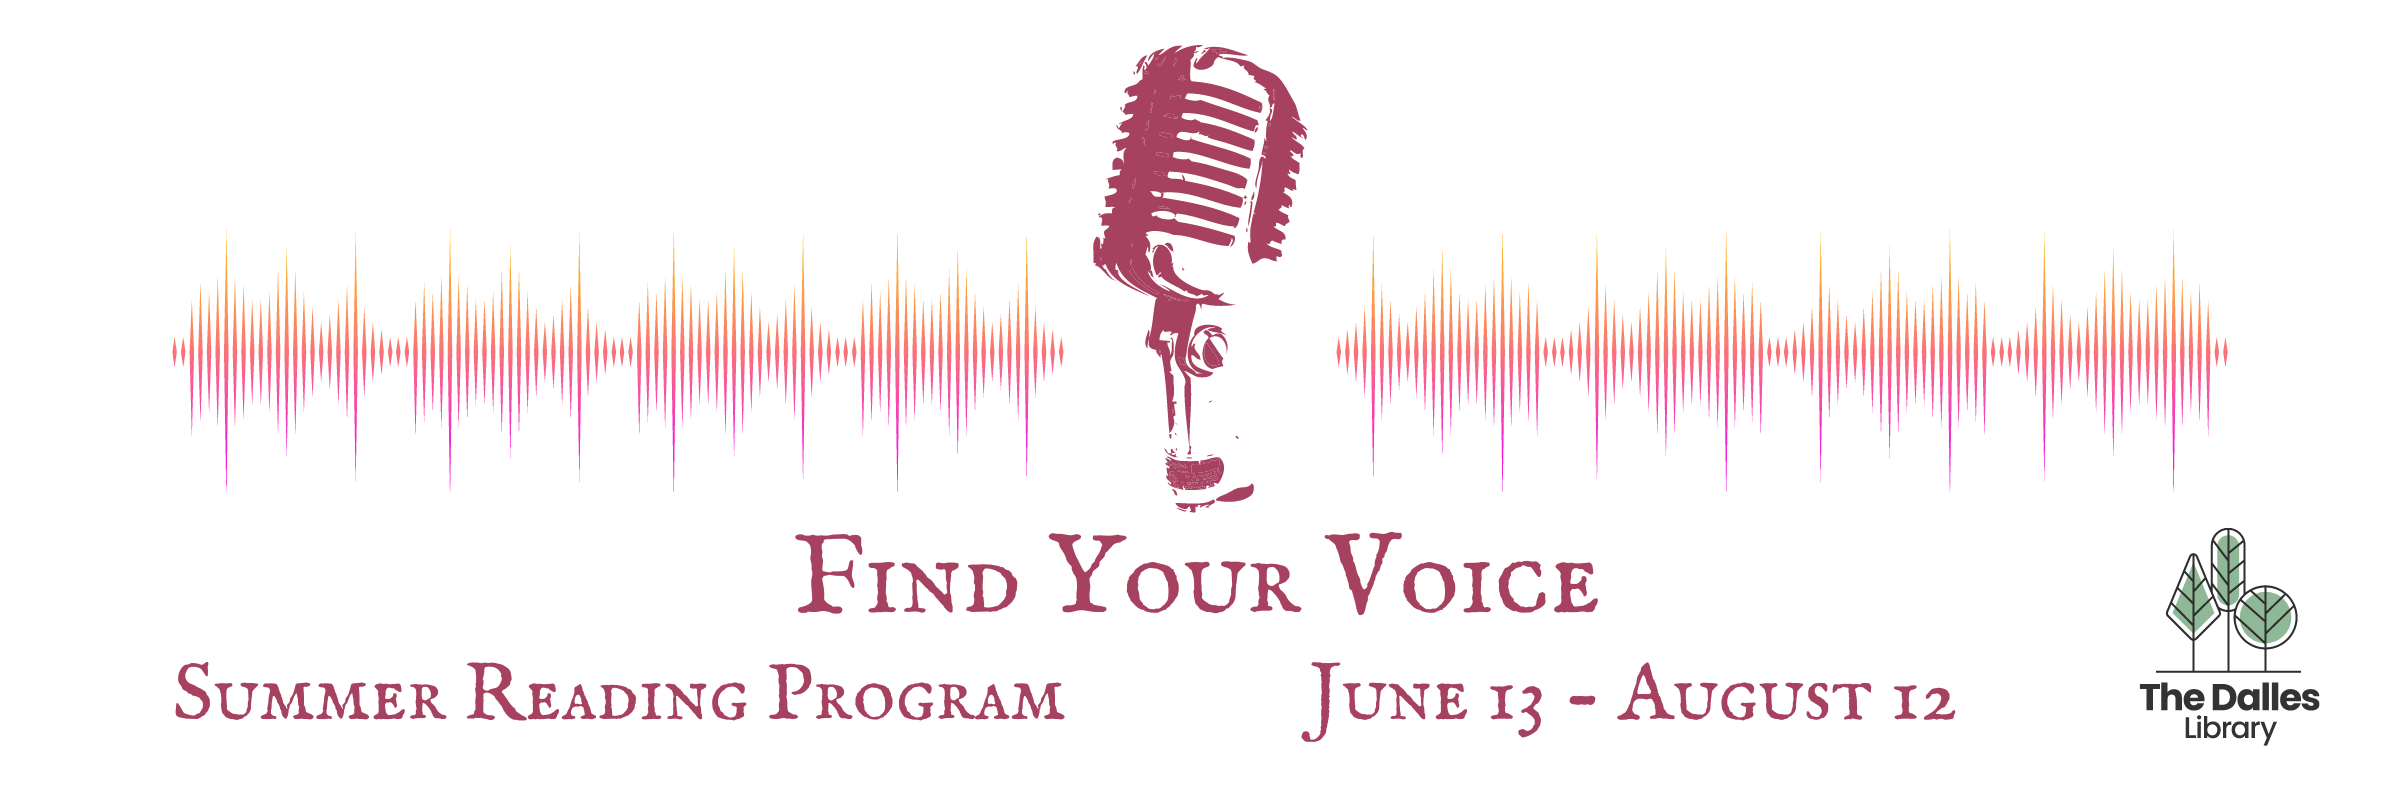 Find Your Voice Summer Reading Program: Jun 13 to Aug 12